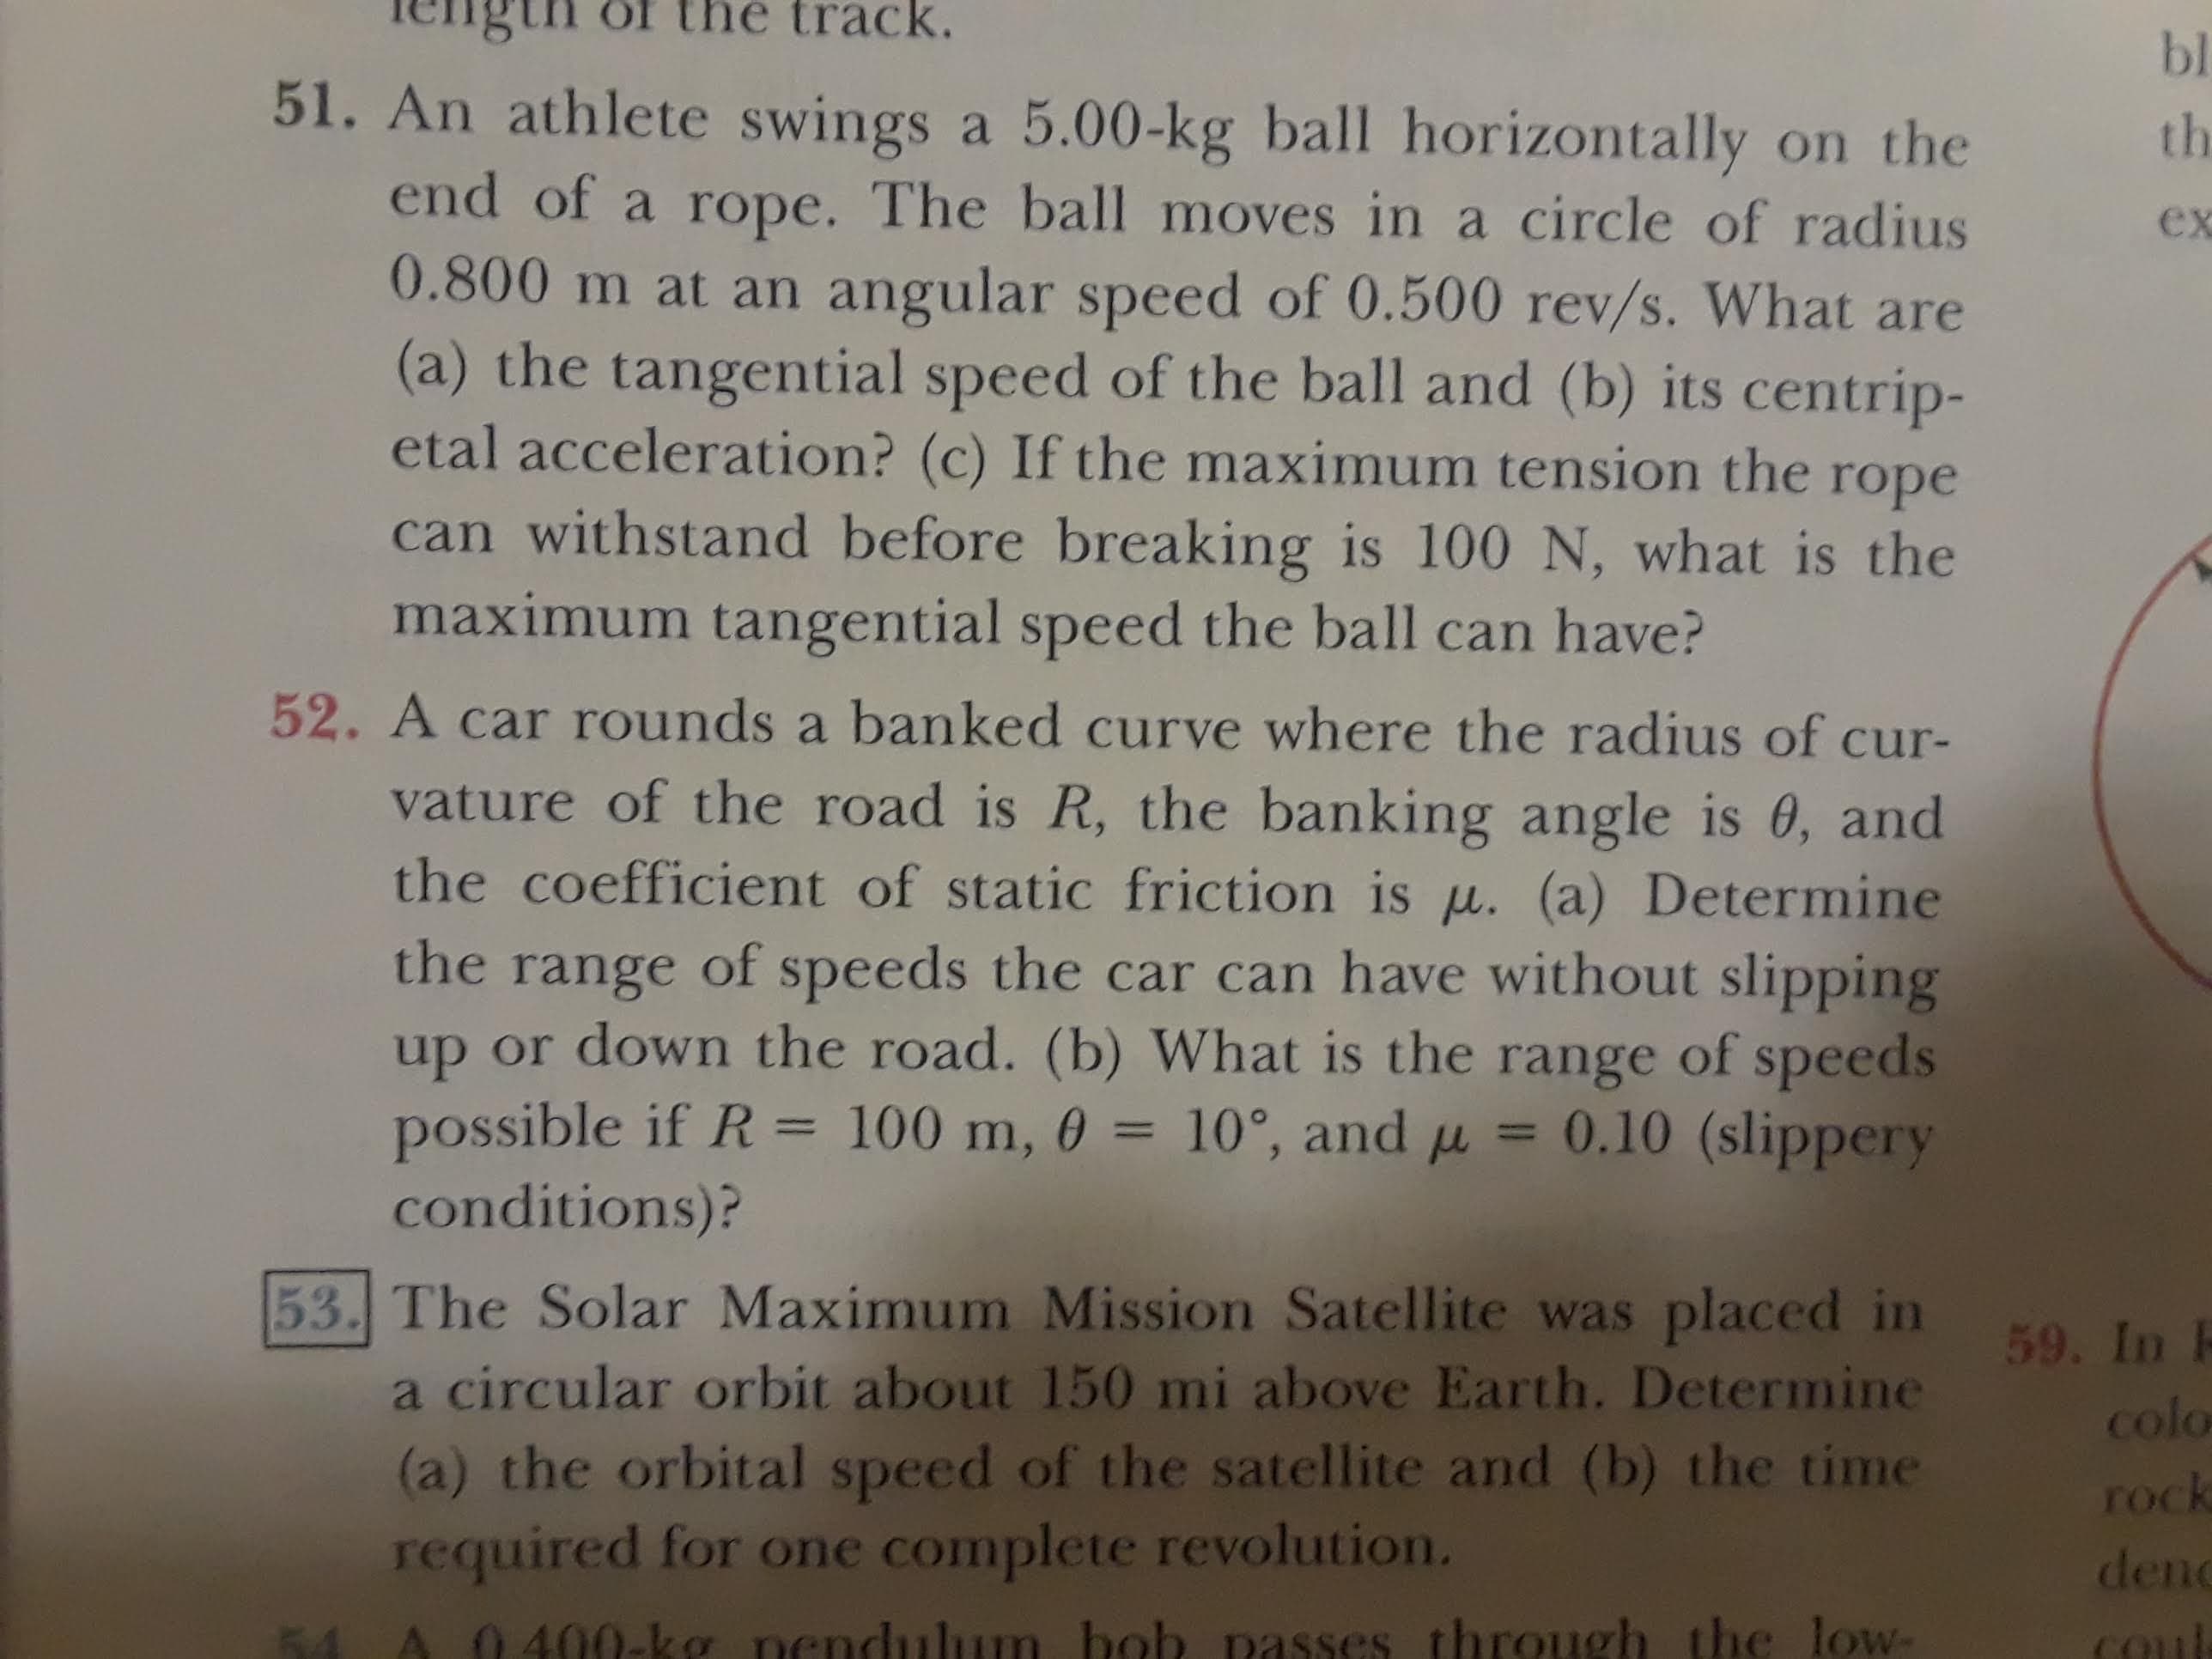 of
track.
bl
51. An athlete swings a 5.00 -kg ball horizontally on the
end of a rope. The ball moves in a circle of radius
0.800 m at an angular speed of 0.500 rev/s. What are
(a) the tangential speed of the ball and (b) its centrip-
etal acceleration? (c) If the maximum tension the rope
th
ex
can withstand before breaking is 100 N, what is the
maximum tangential speed the ball can have?
52. A car rounds a banked curve where the radius of cur-
vature of the road is R, the banking angle is 0, and
the coefficient of static friction is u. (a) Determine
the range of speeds the car can have without slipping
up or down the road. (b) What is the range of speeds
possible if R = 100 m, 0 = 10°, and u = 0.10 (slippery
conditions)?
53. The Solar Maximum Mission Satellite was placed in
59. In P
a circular orbit about 150 mi above Earth. Determine
colo
(a) the orbital speed of the satellite and (b) the time
required for one complete revolution.
rock
den
400-kg nendulum bob passes through the low-
